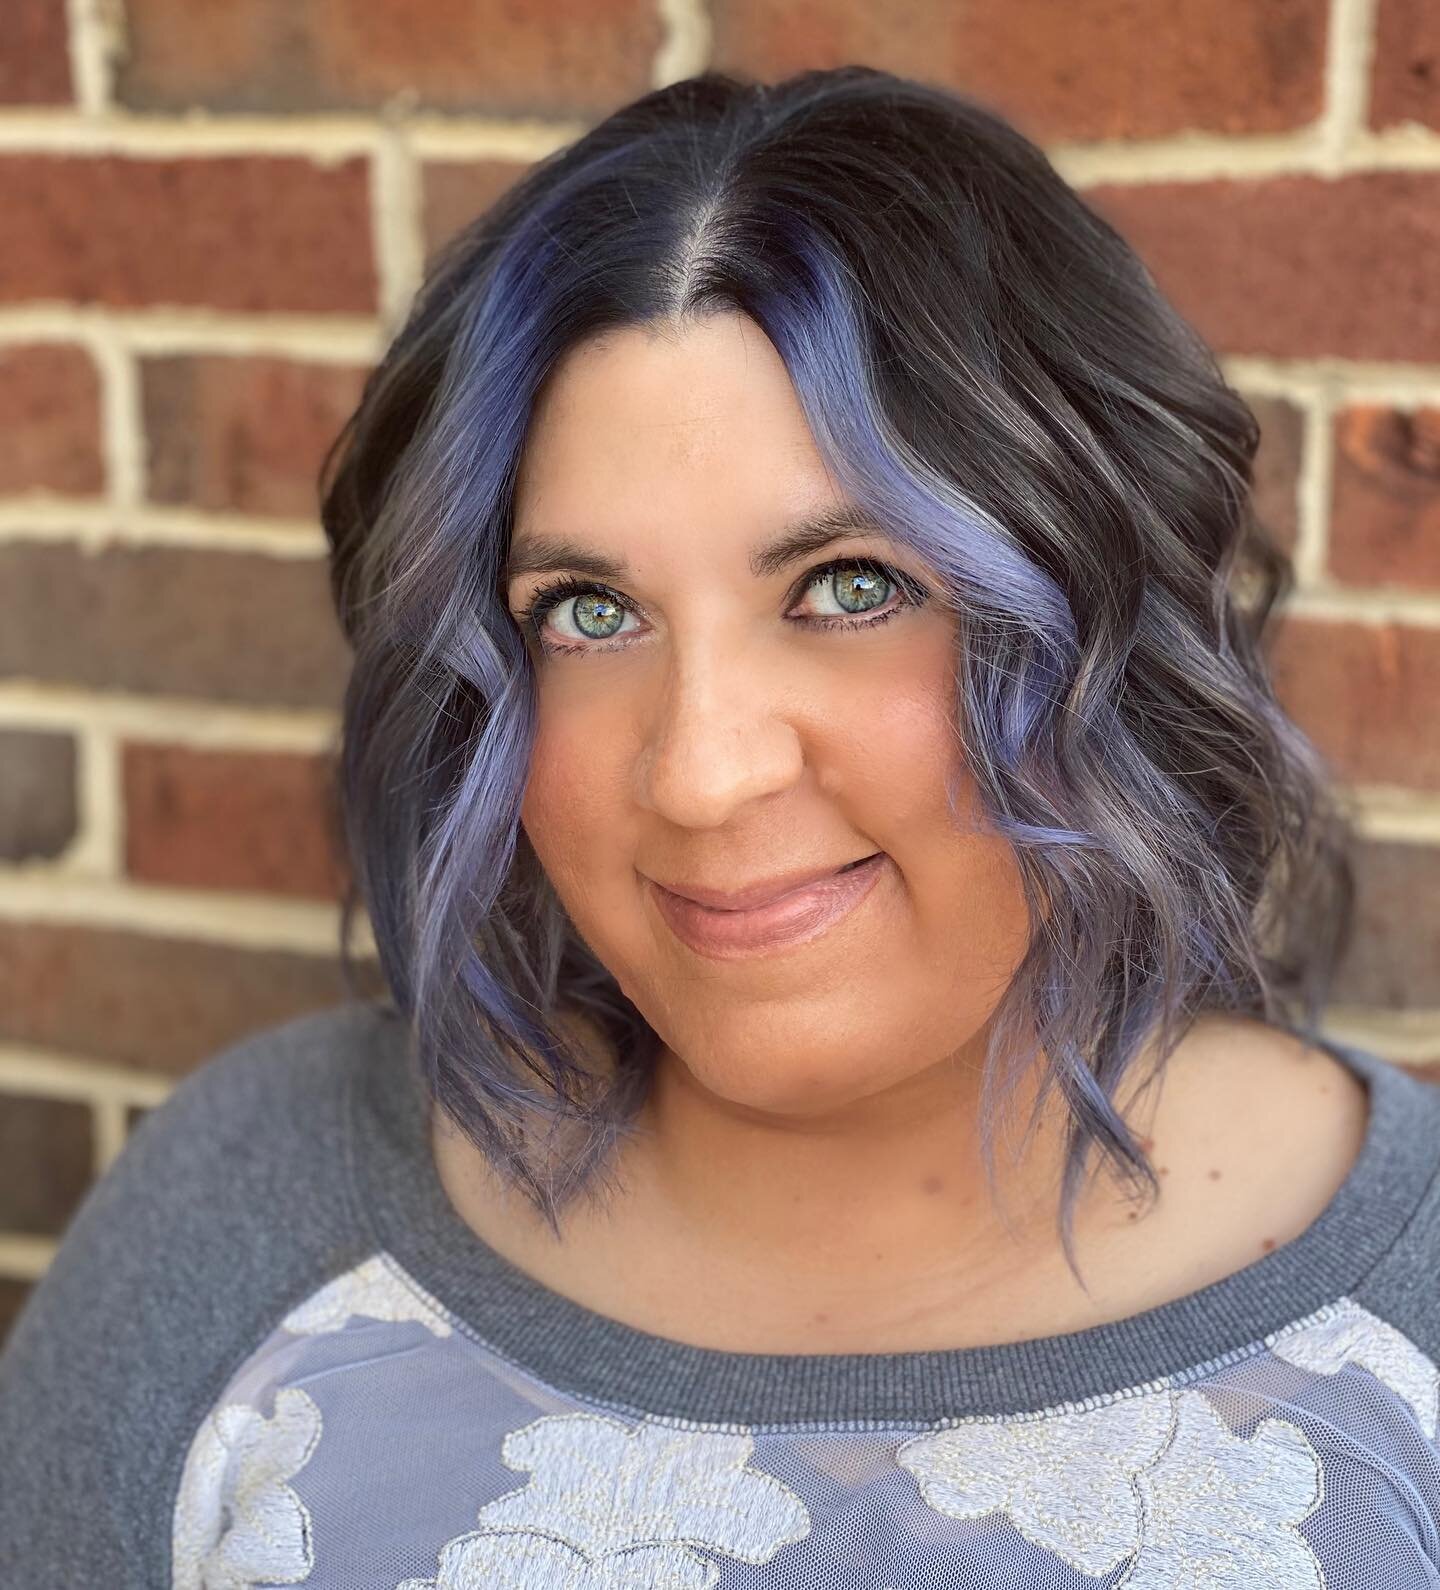 This beauty was ready for a big change! Custom blue/grey with @goldwellus 💙
#medinaohiohairstylist 
#medinaohio 
#medinaoh 
#330stylist 
#medinabalayage 
#medinaohbalayage 
#masterstylist 
#cheflife 
#chef 
#kitchenlife